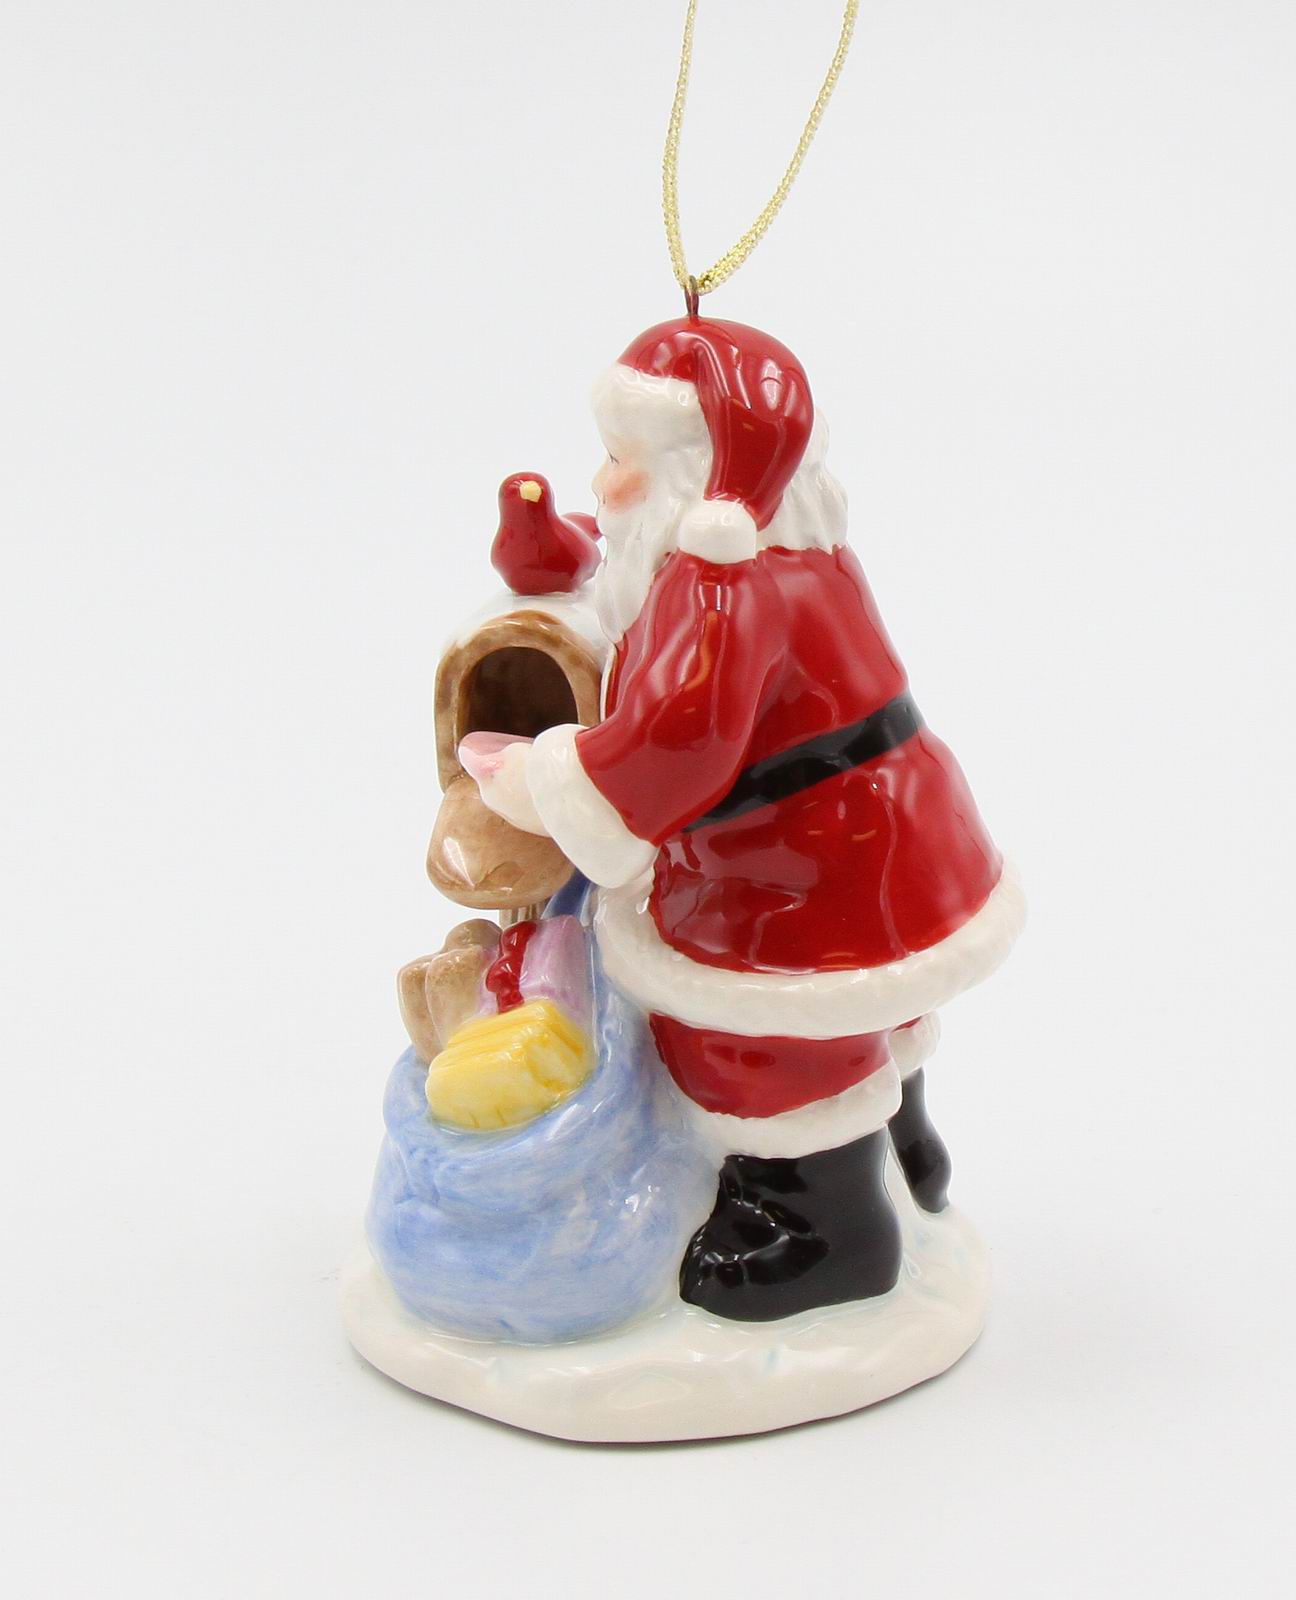 Ceramic Christmas Santa With Mail Box Ornament, Home Décor, Gift for Her, Gift for Mom, Kitchen Décor, Christmas Décor